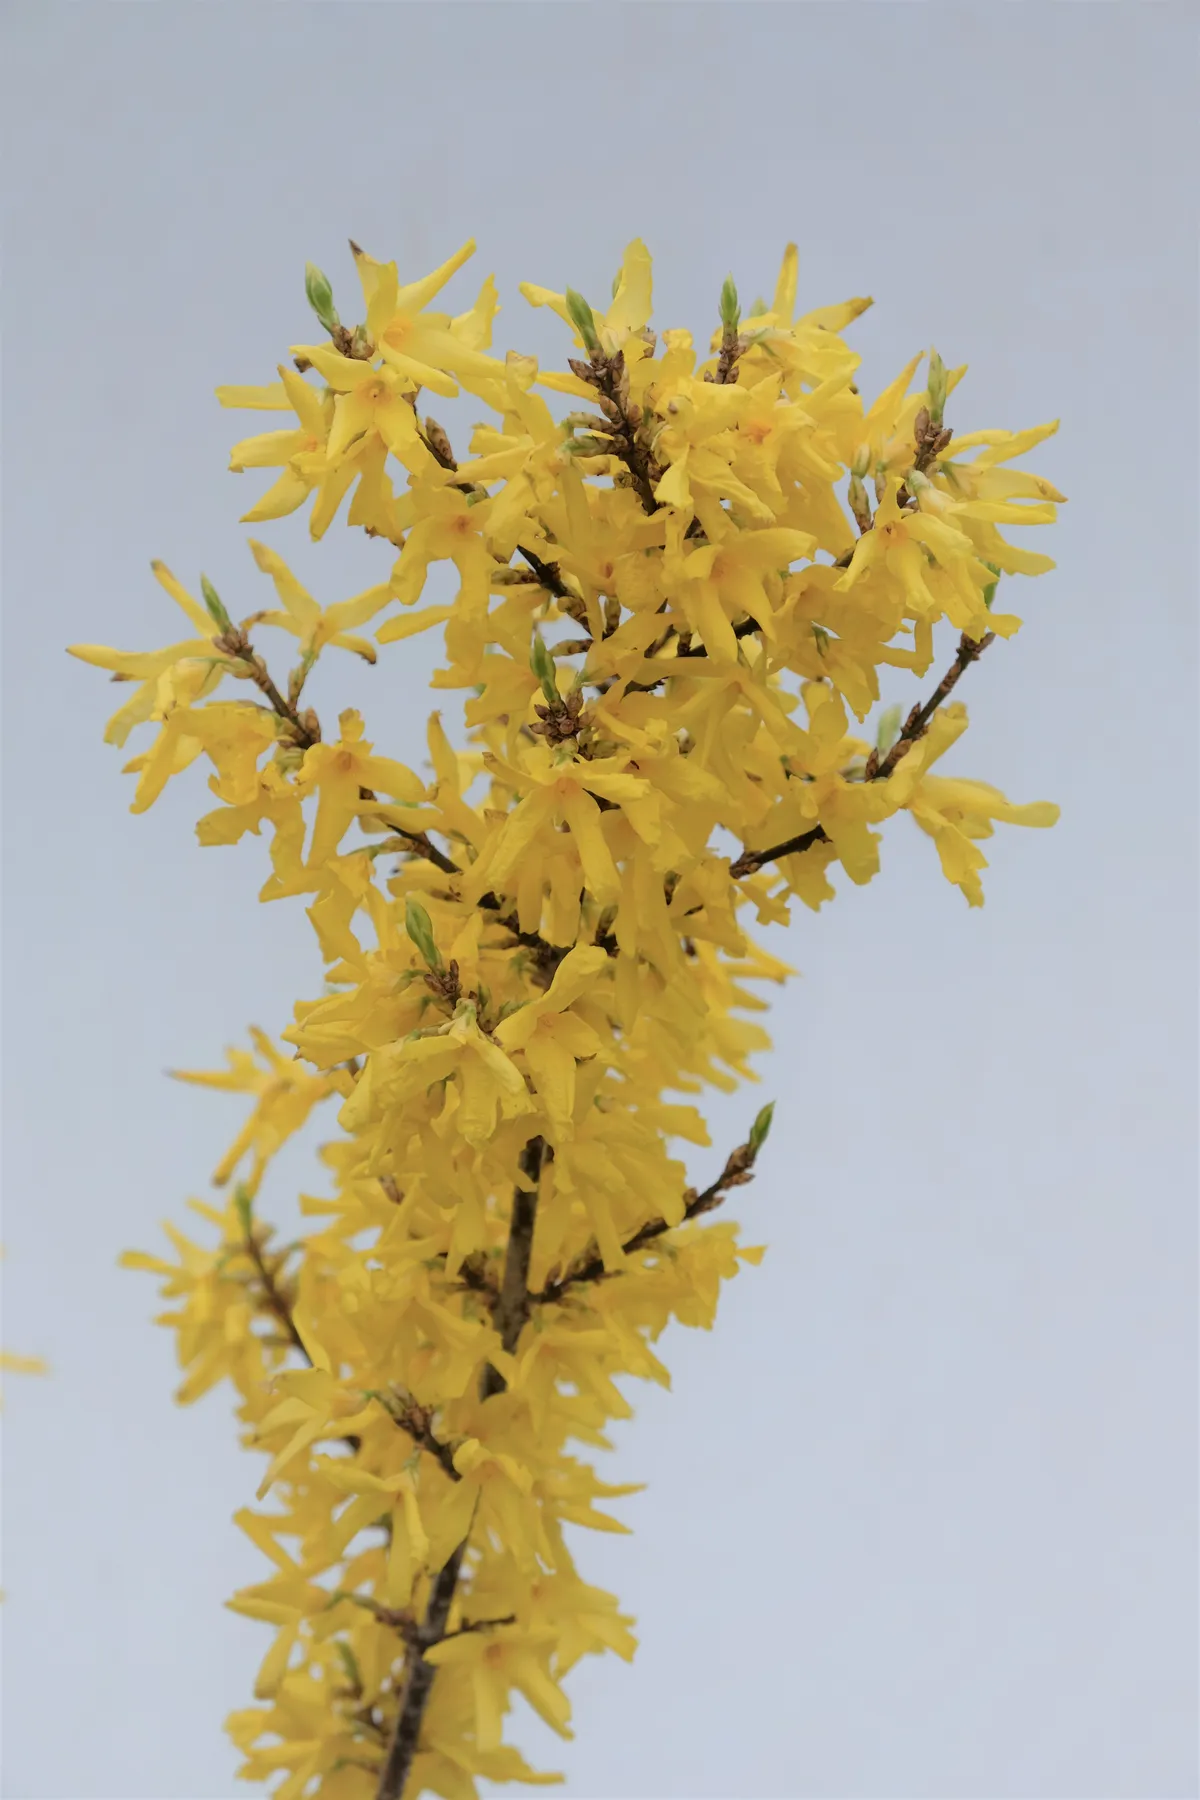 Forsythia Discovery 2 Sparsholt College: RHS Plant of the year shortlist